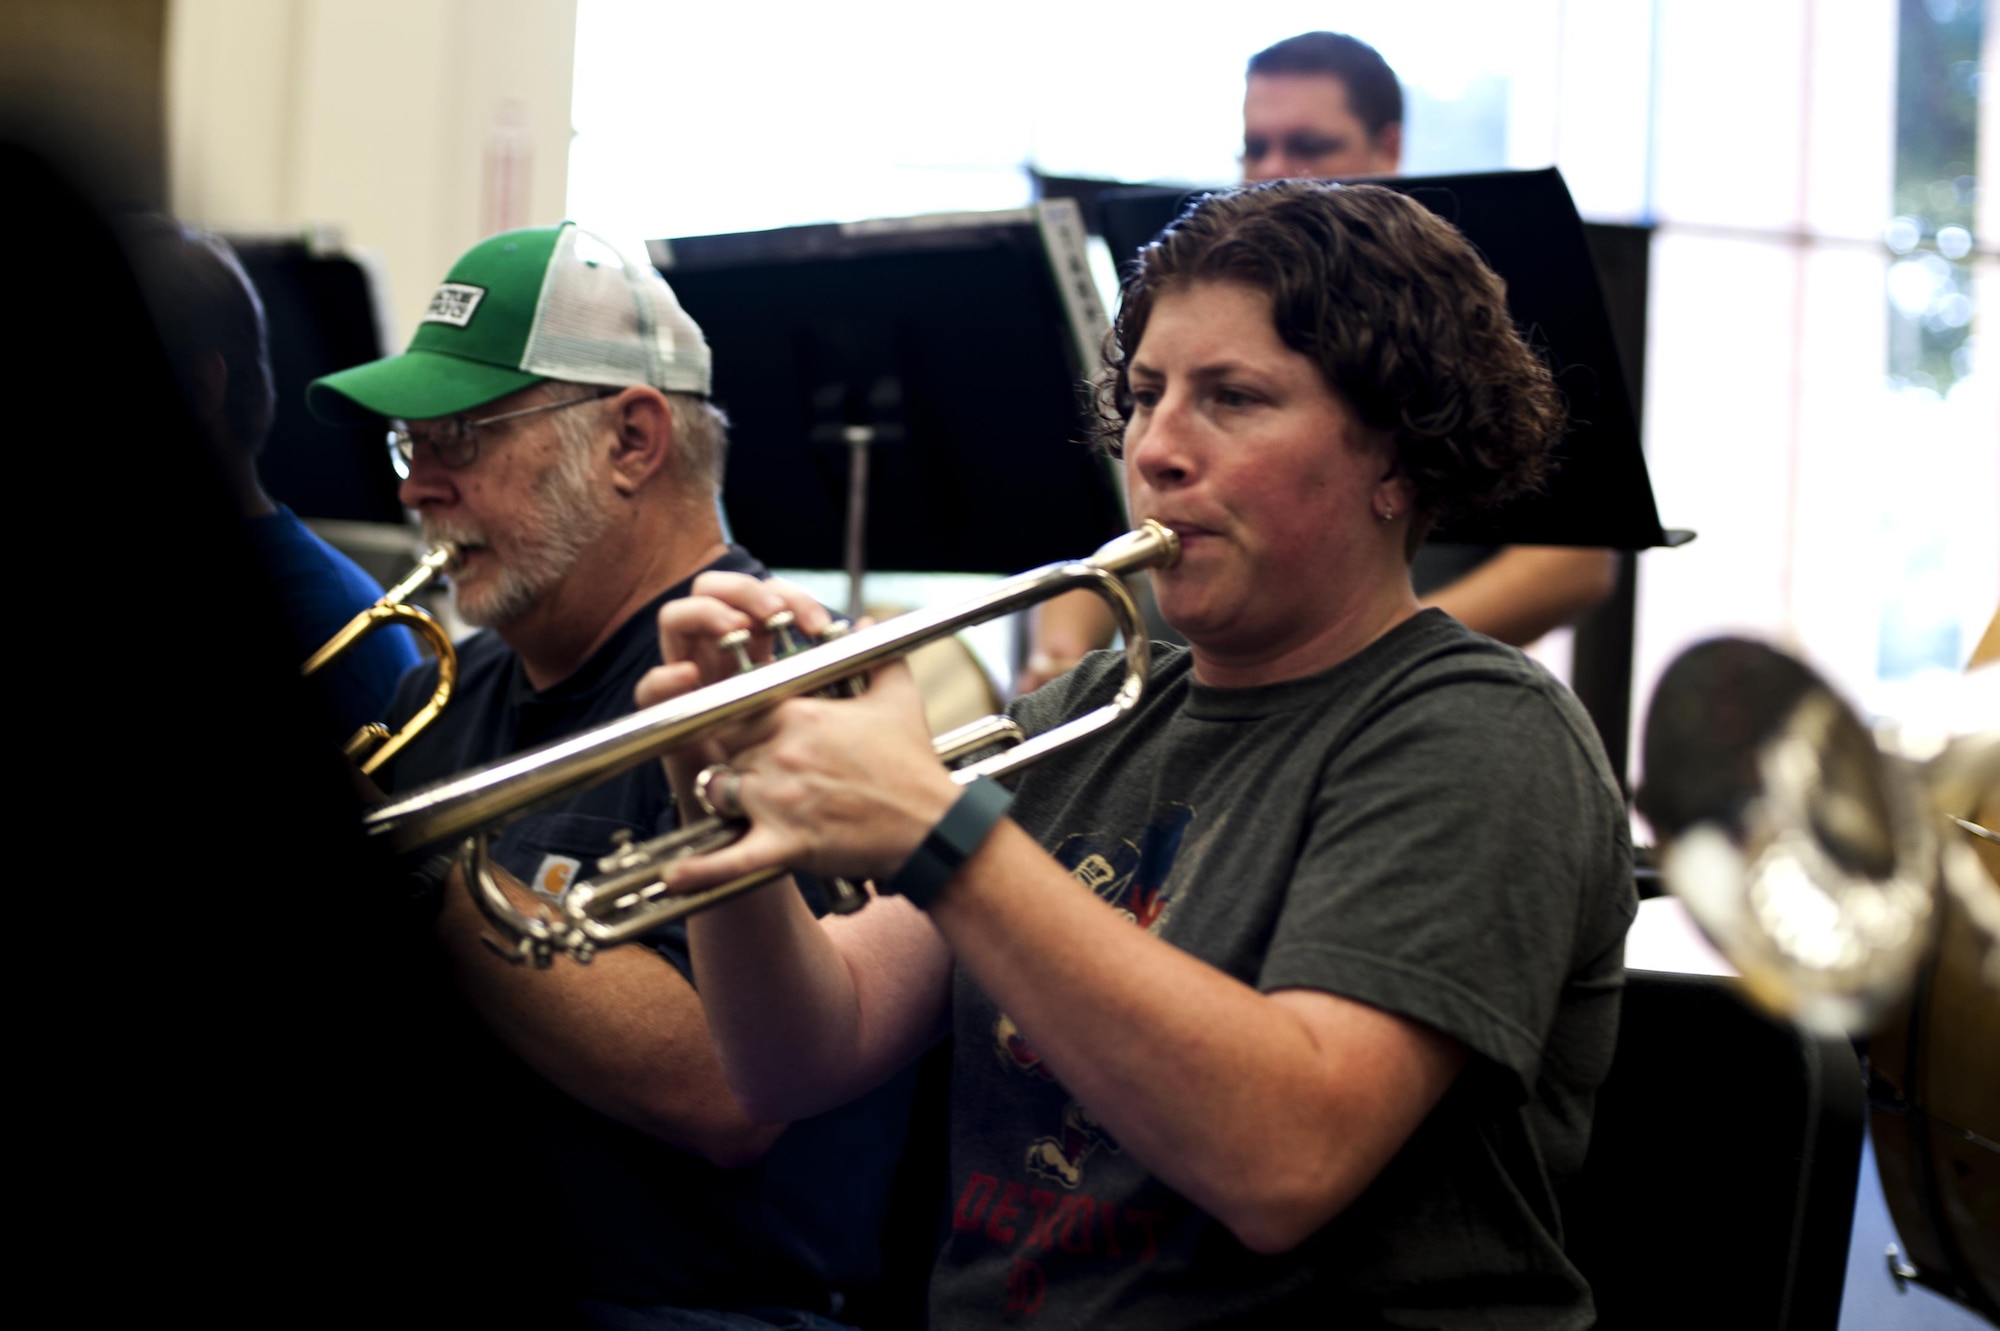 Kristin M. Ellis, Central High School assistant band director, practices her trumpet during band practice in the band hall at Angelo State University, San Angelo, Texas, July 28, 2015. The San Angelo Community band, founded 26 years ago, made up of various people from all backgrounds and ages, including military members retired and active. (U.S. Air Force photo by Senior Airman Scott Jackson/Released)